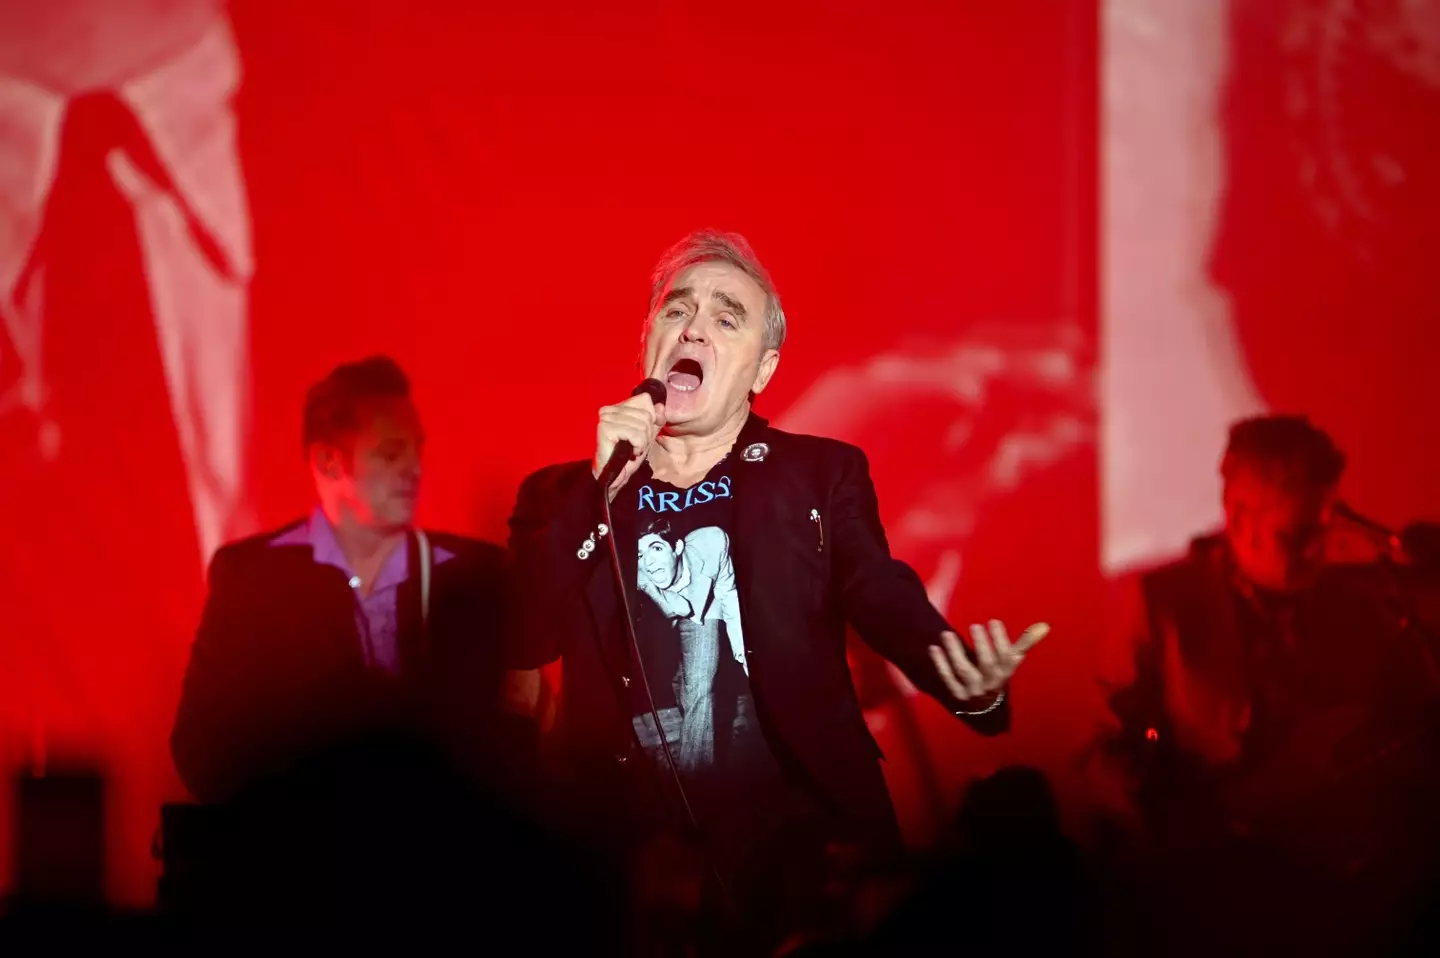 Morrissey performing earlier this year.